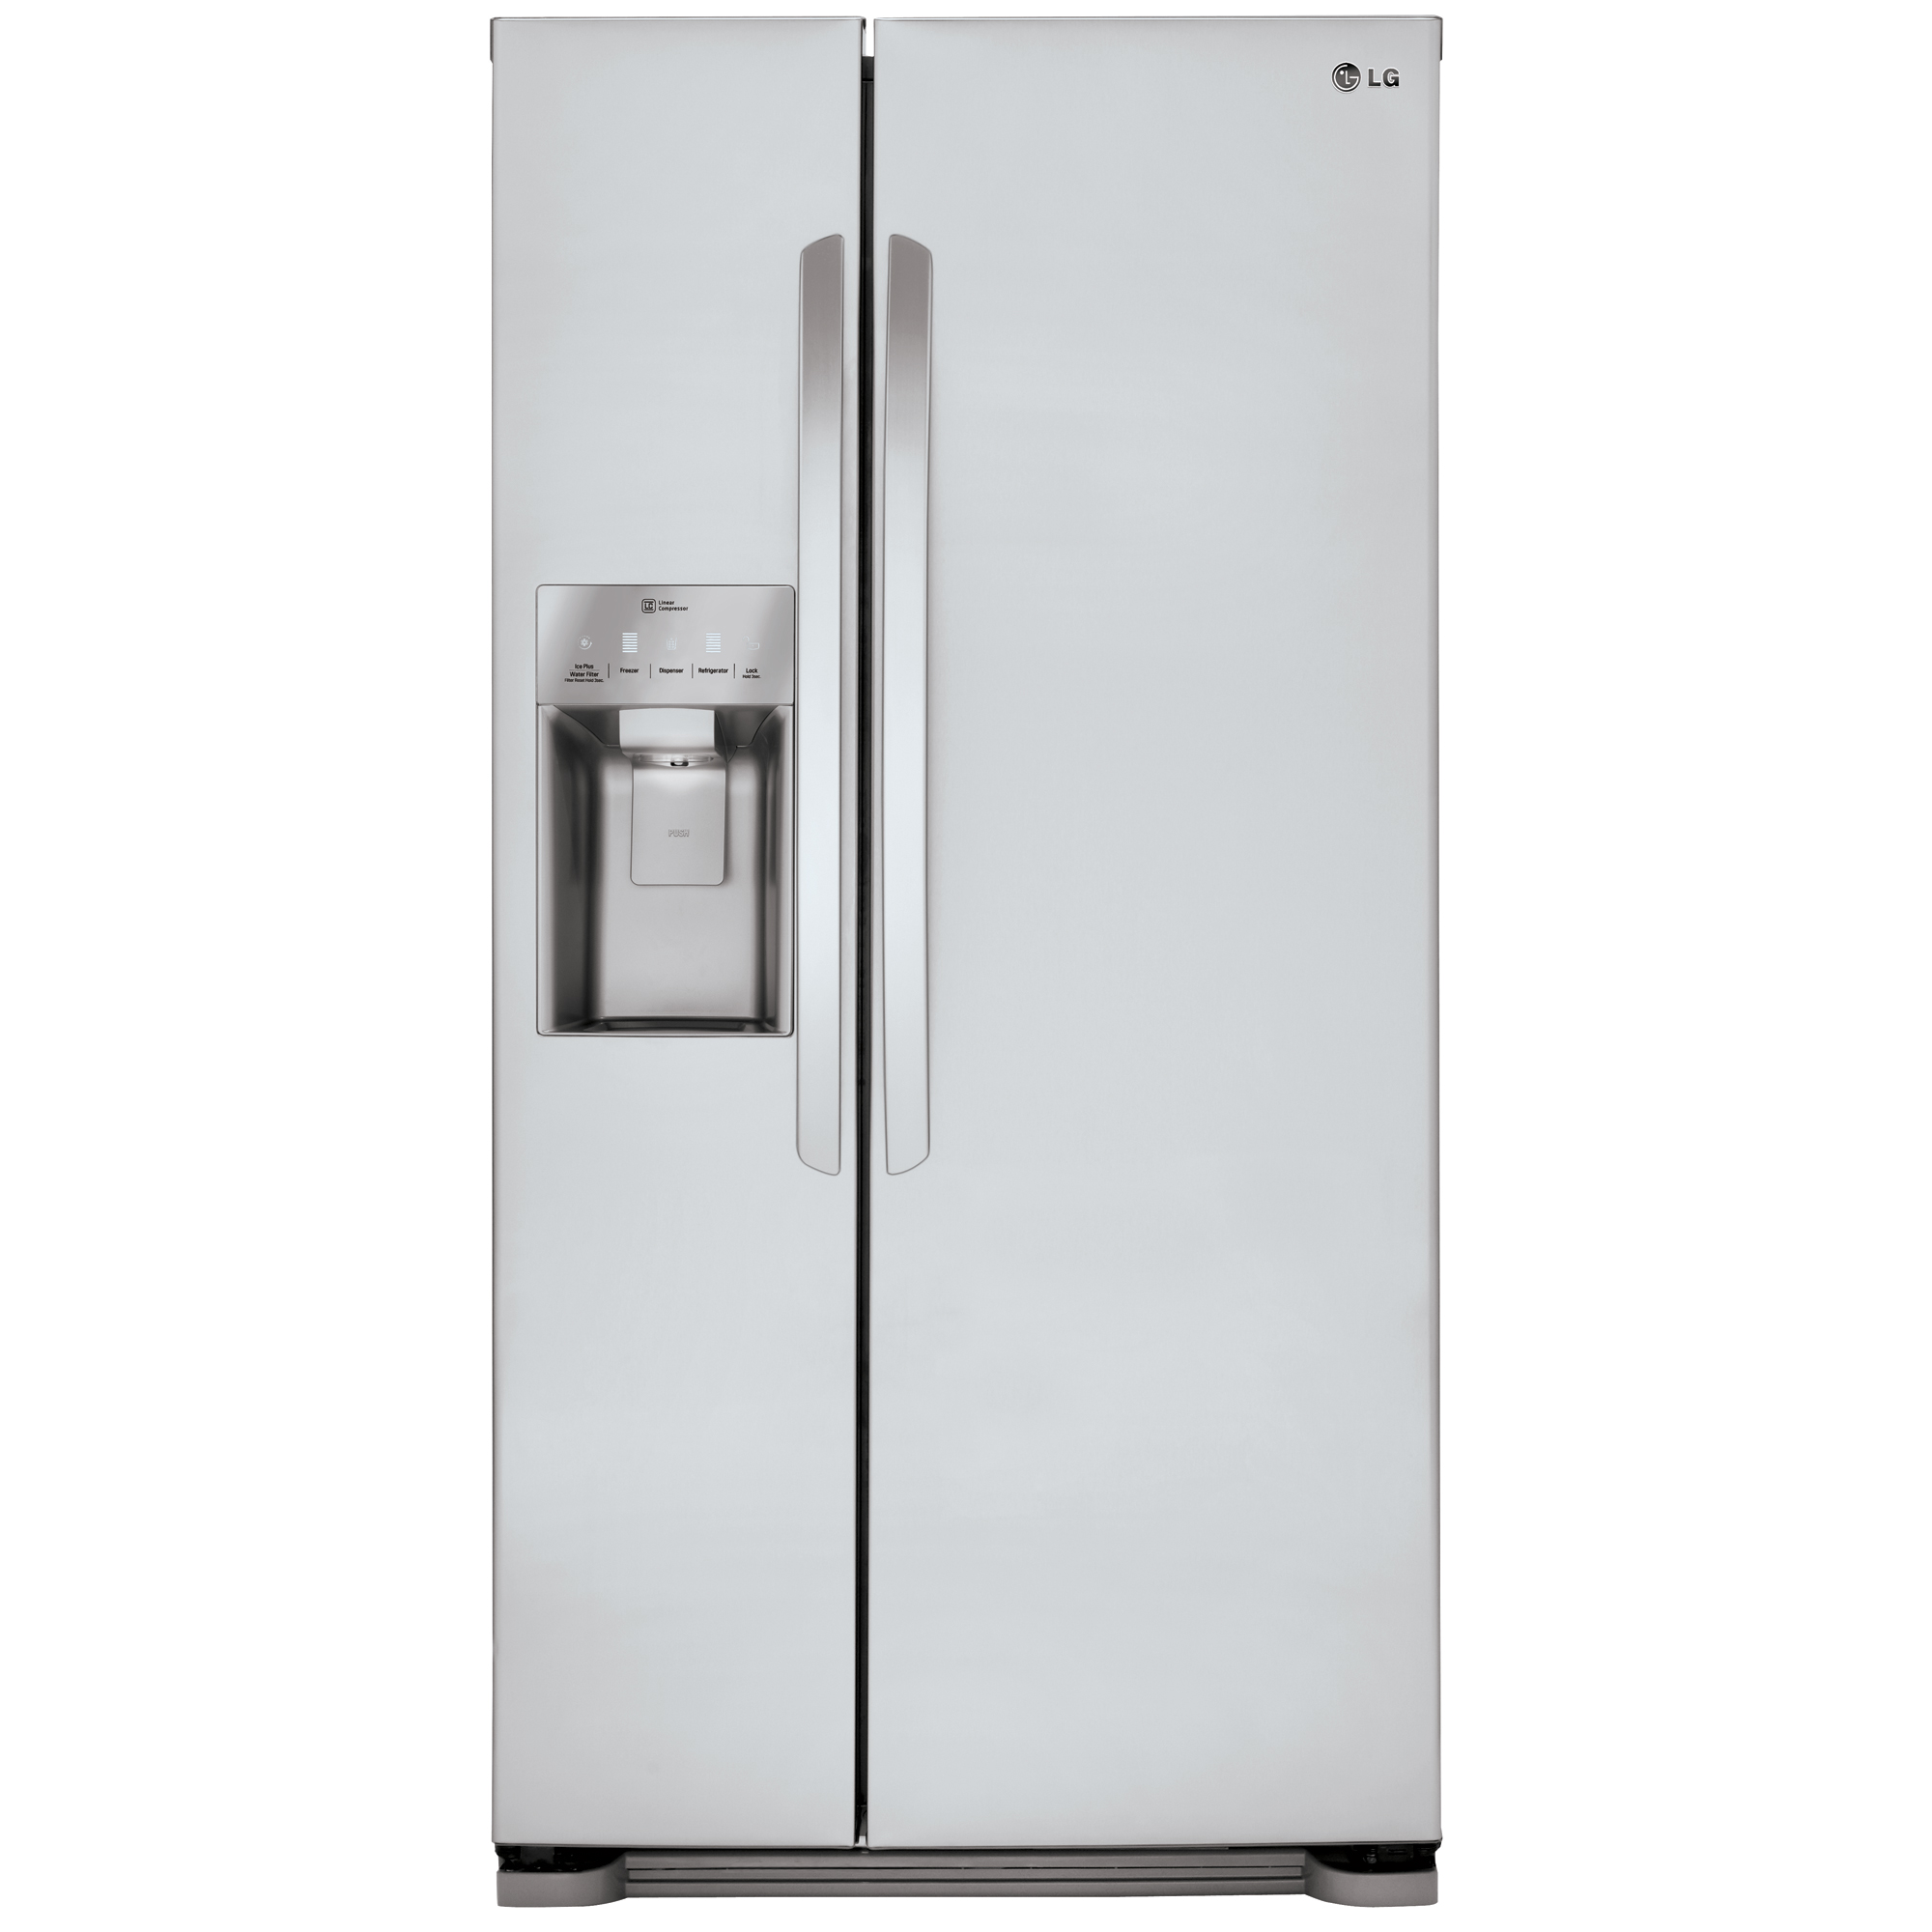 0048231786652 - LSXS22423S 22.1 CU. FT. SIDE-BY-SIDE REFRIGERATOR WITH ICE & WATER DISPENSER (33 WIDTH) &#8211; STAINLESS